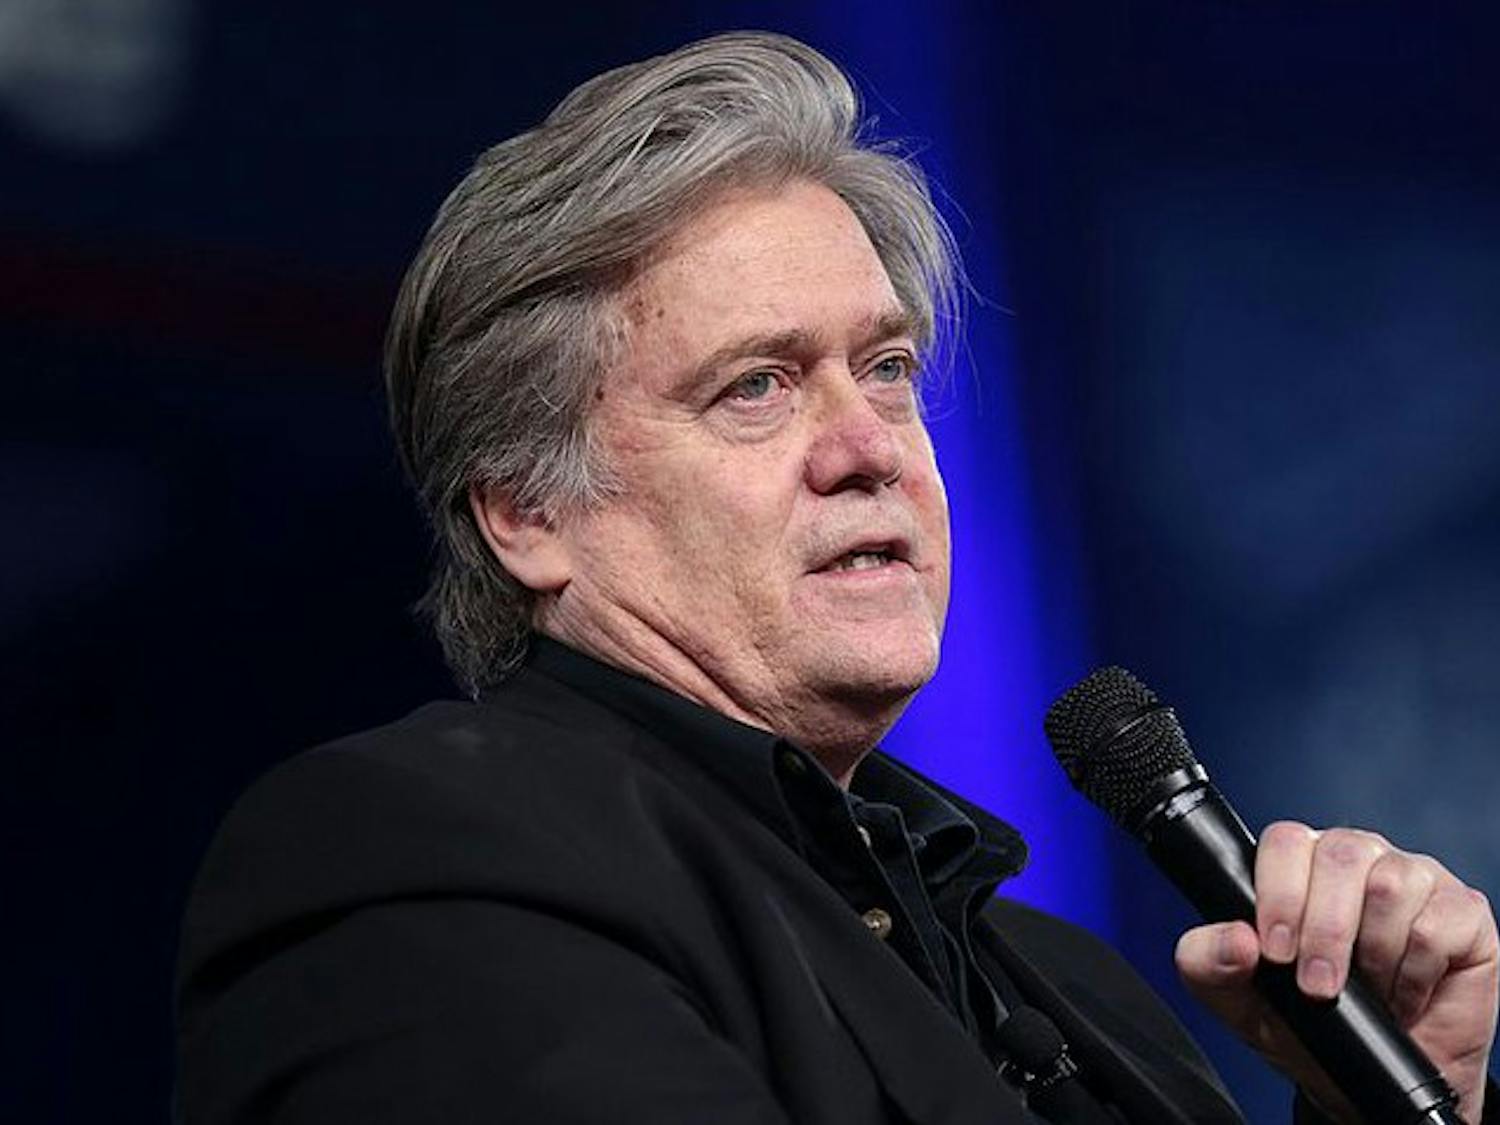 A super PAC supported by chair of Breitbart News and former White House chief strategist Steve Bannon endorsed Kevin Nicholson Tuesday for Wisconsin U.S. Senate.